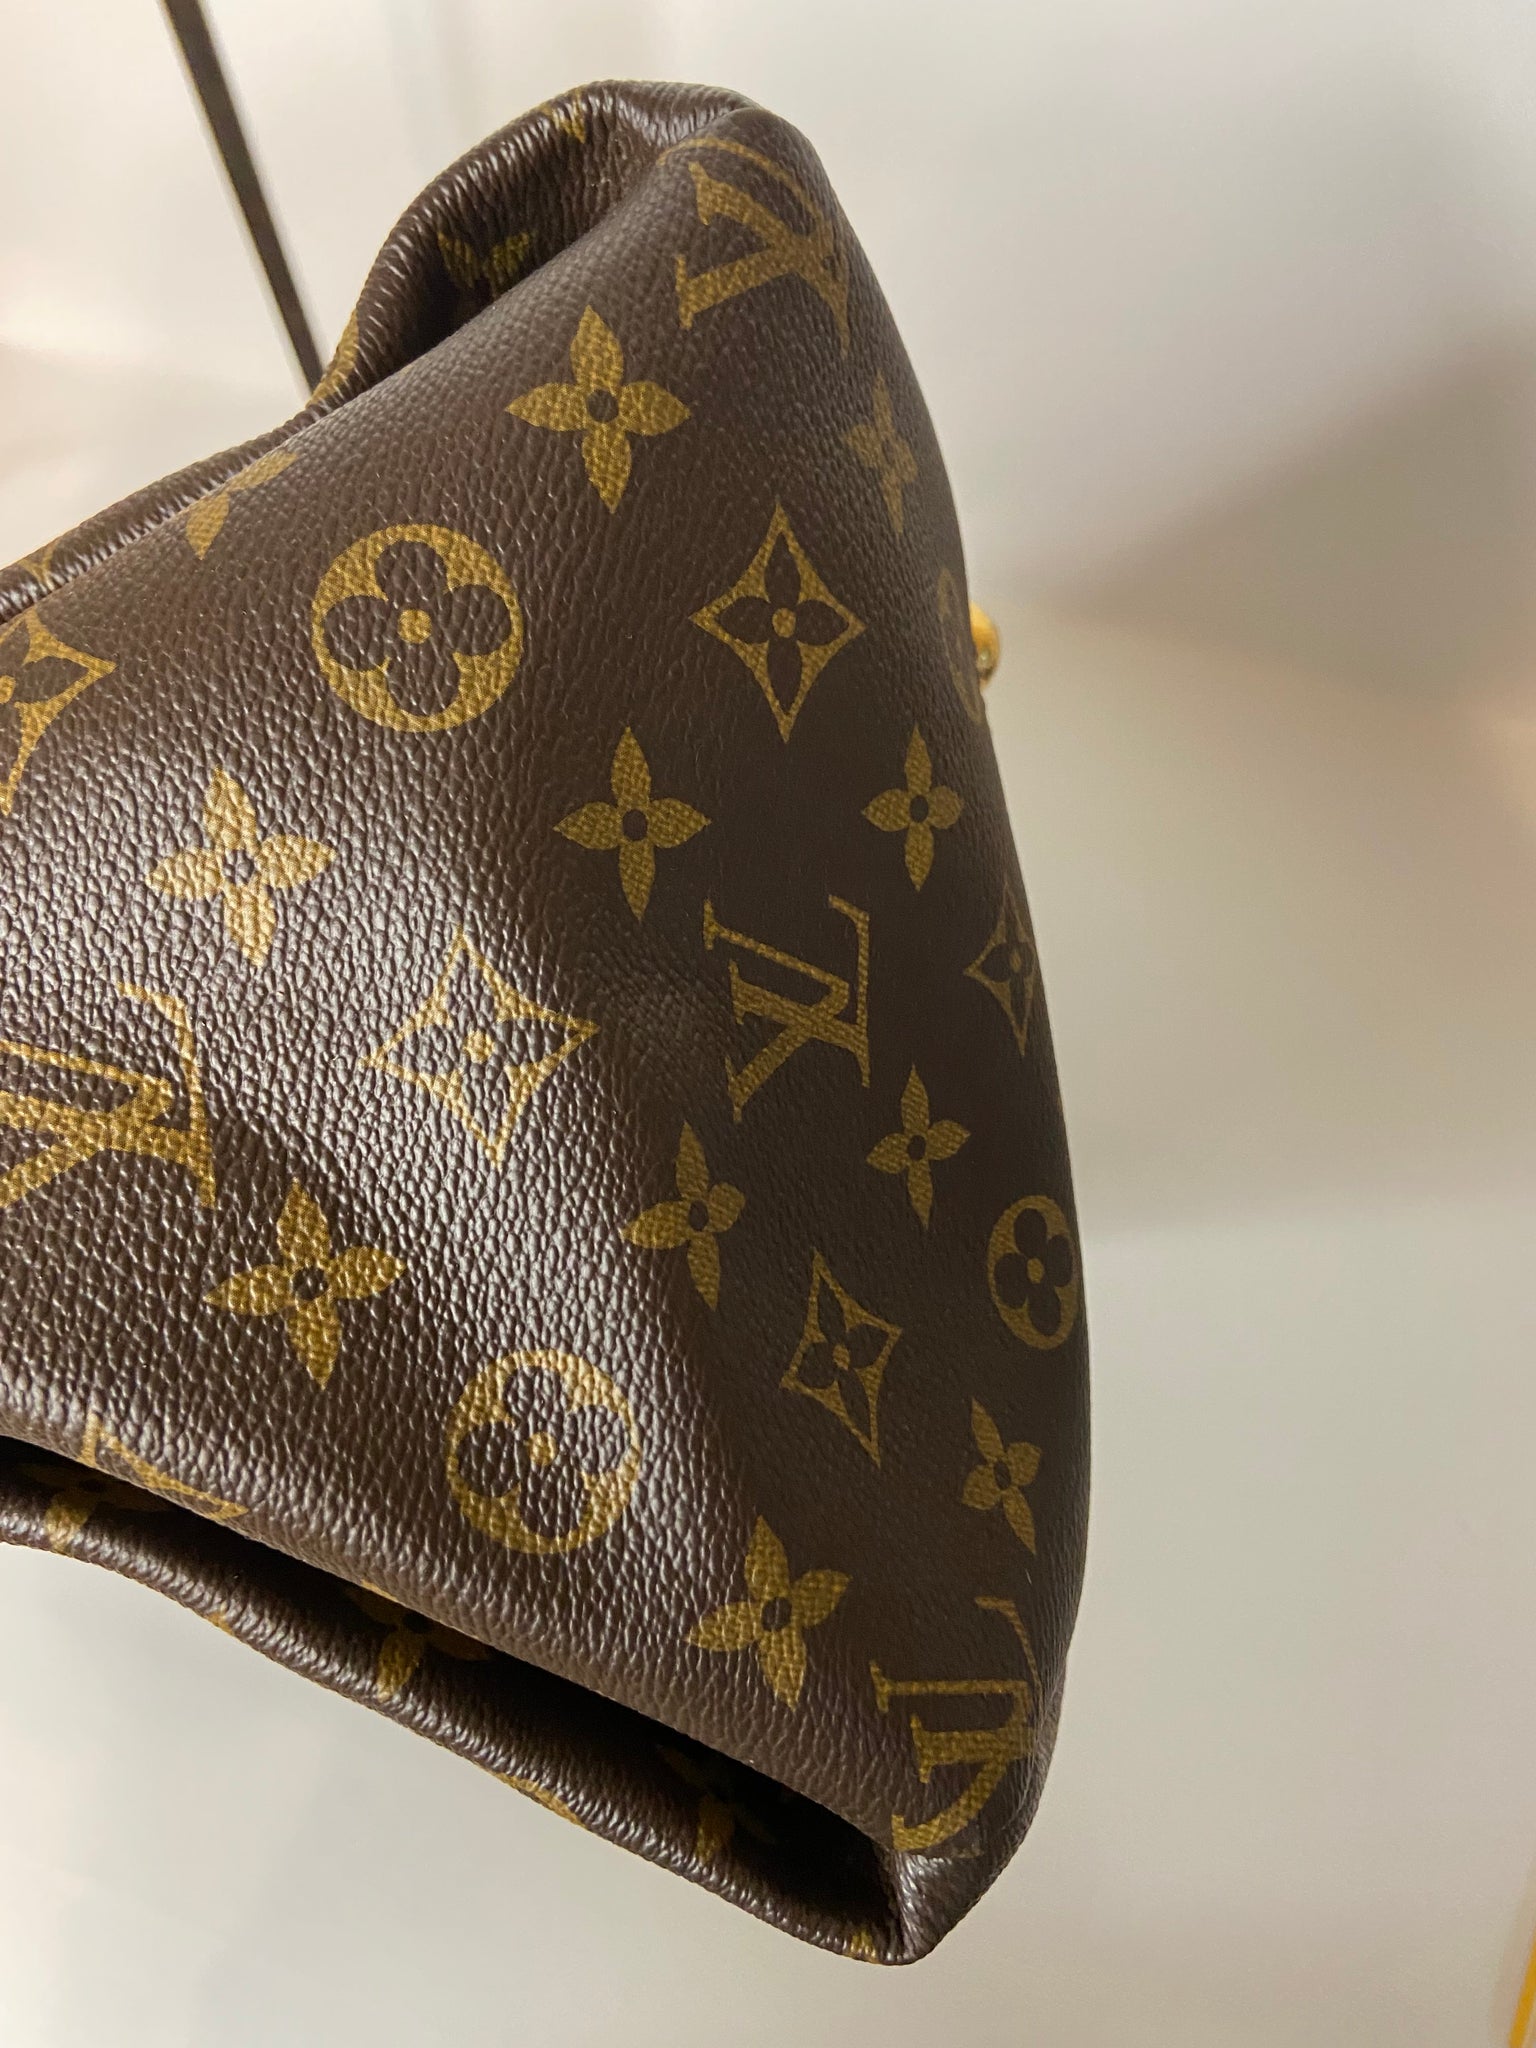 💯😍Authentic DiSCONTINUED Louis Vuitton Artsy MM  Louis vuitton artsy mm, Louis  vuitton artsy, Louis vuitton